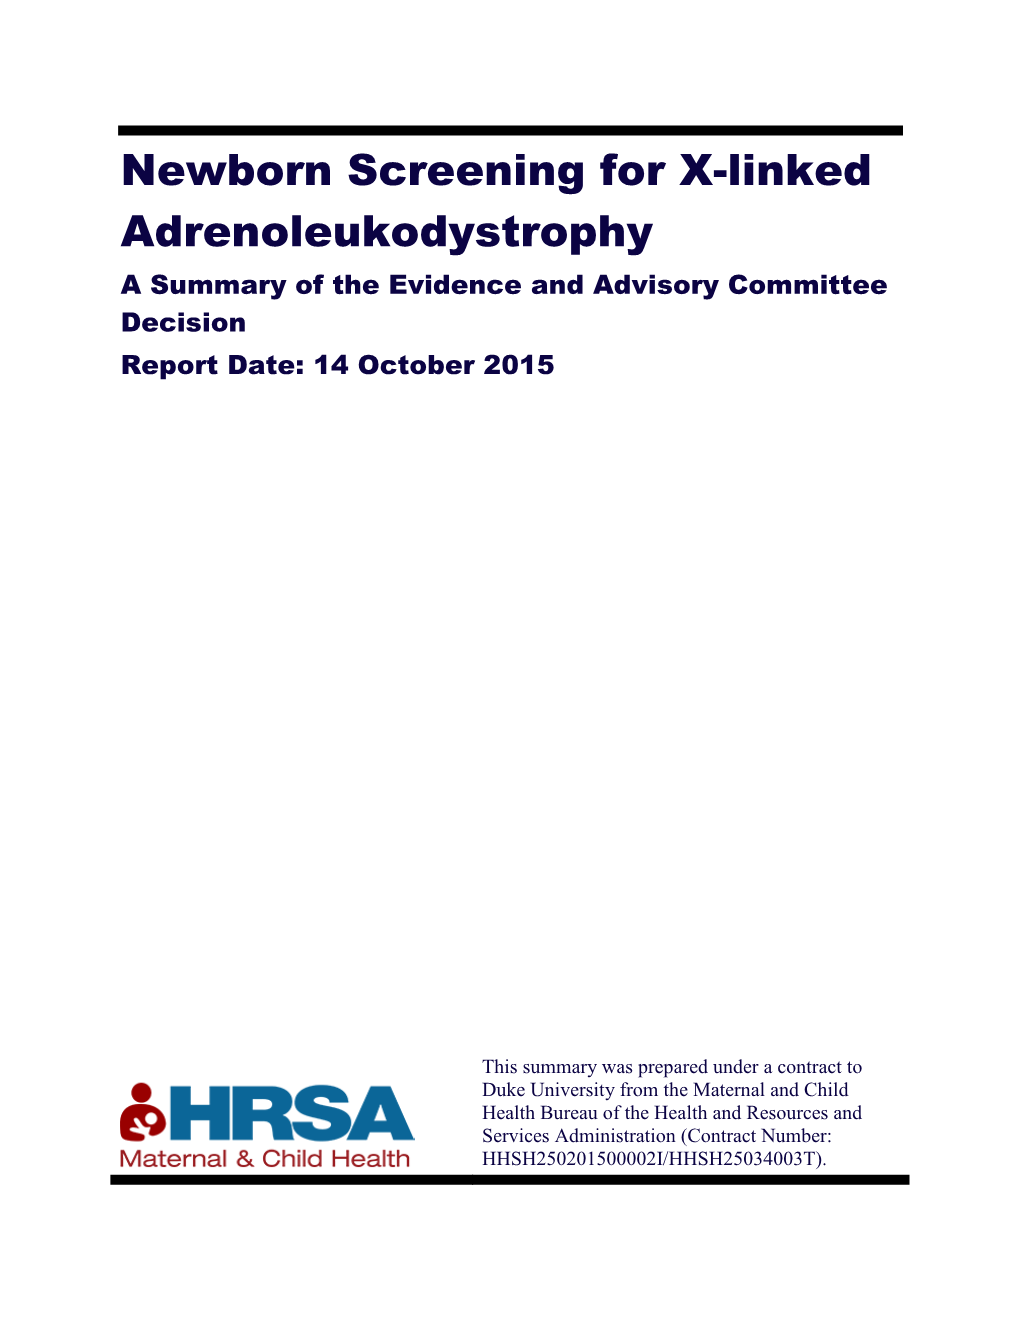 Newborn Screening for X-ALD Can Happen Along with Routine Newborn Screening for Other Conditions in the First Few Days of Life